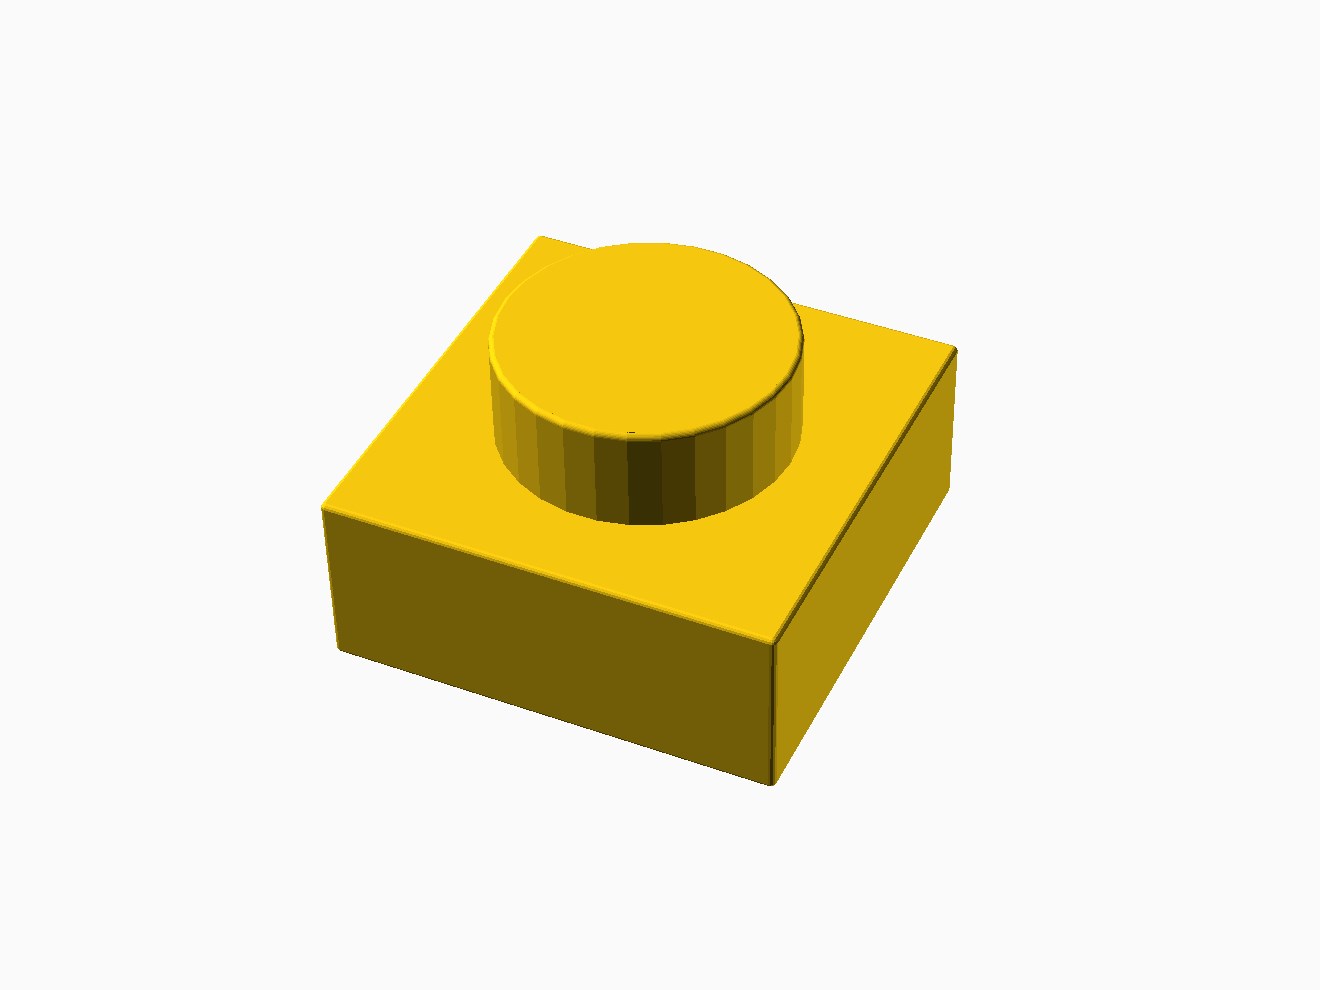 3D printable model of a LEGO 1x1 Plate with standard knobs.